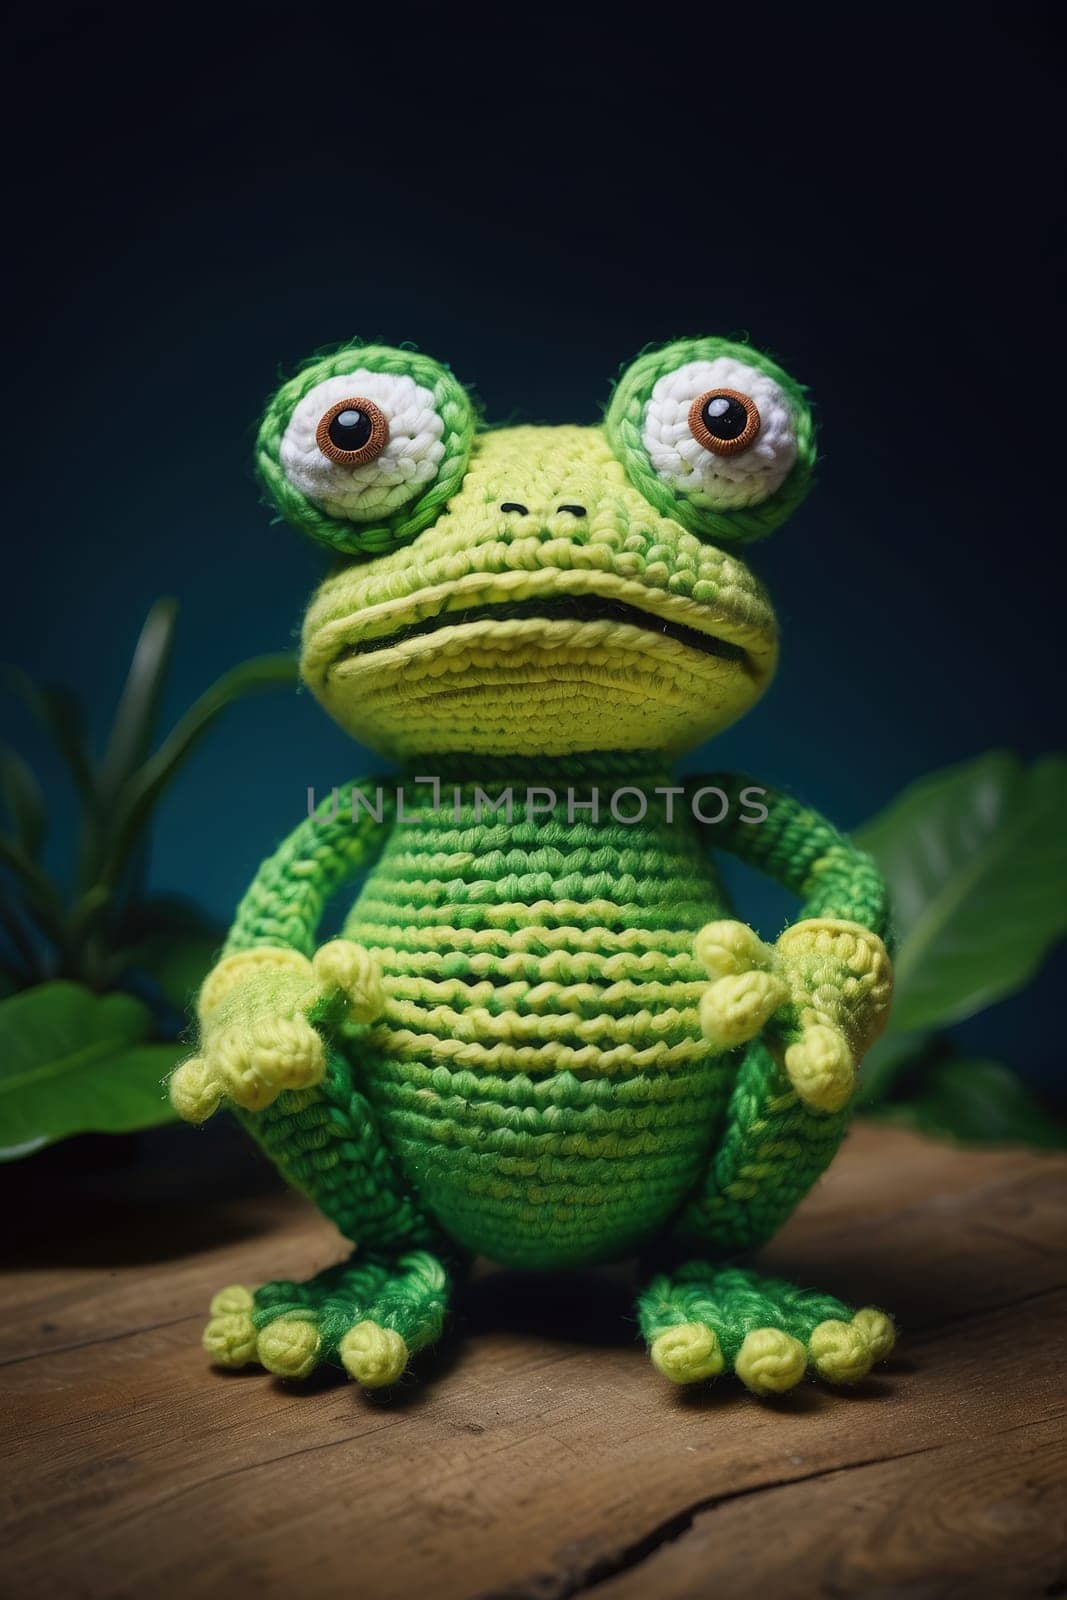 Knit dress toy frog sitting on wooden table with green leaves on dark background by Waseem-Creations